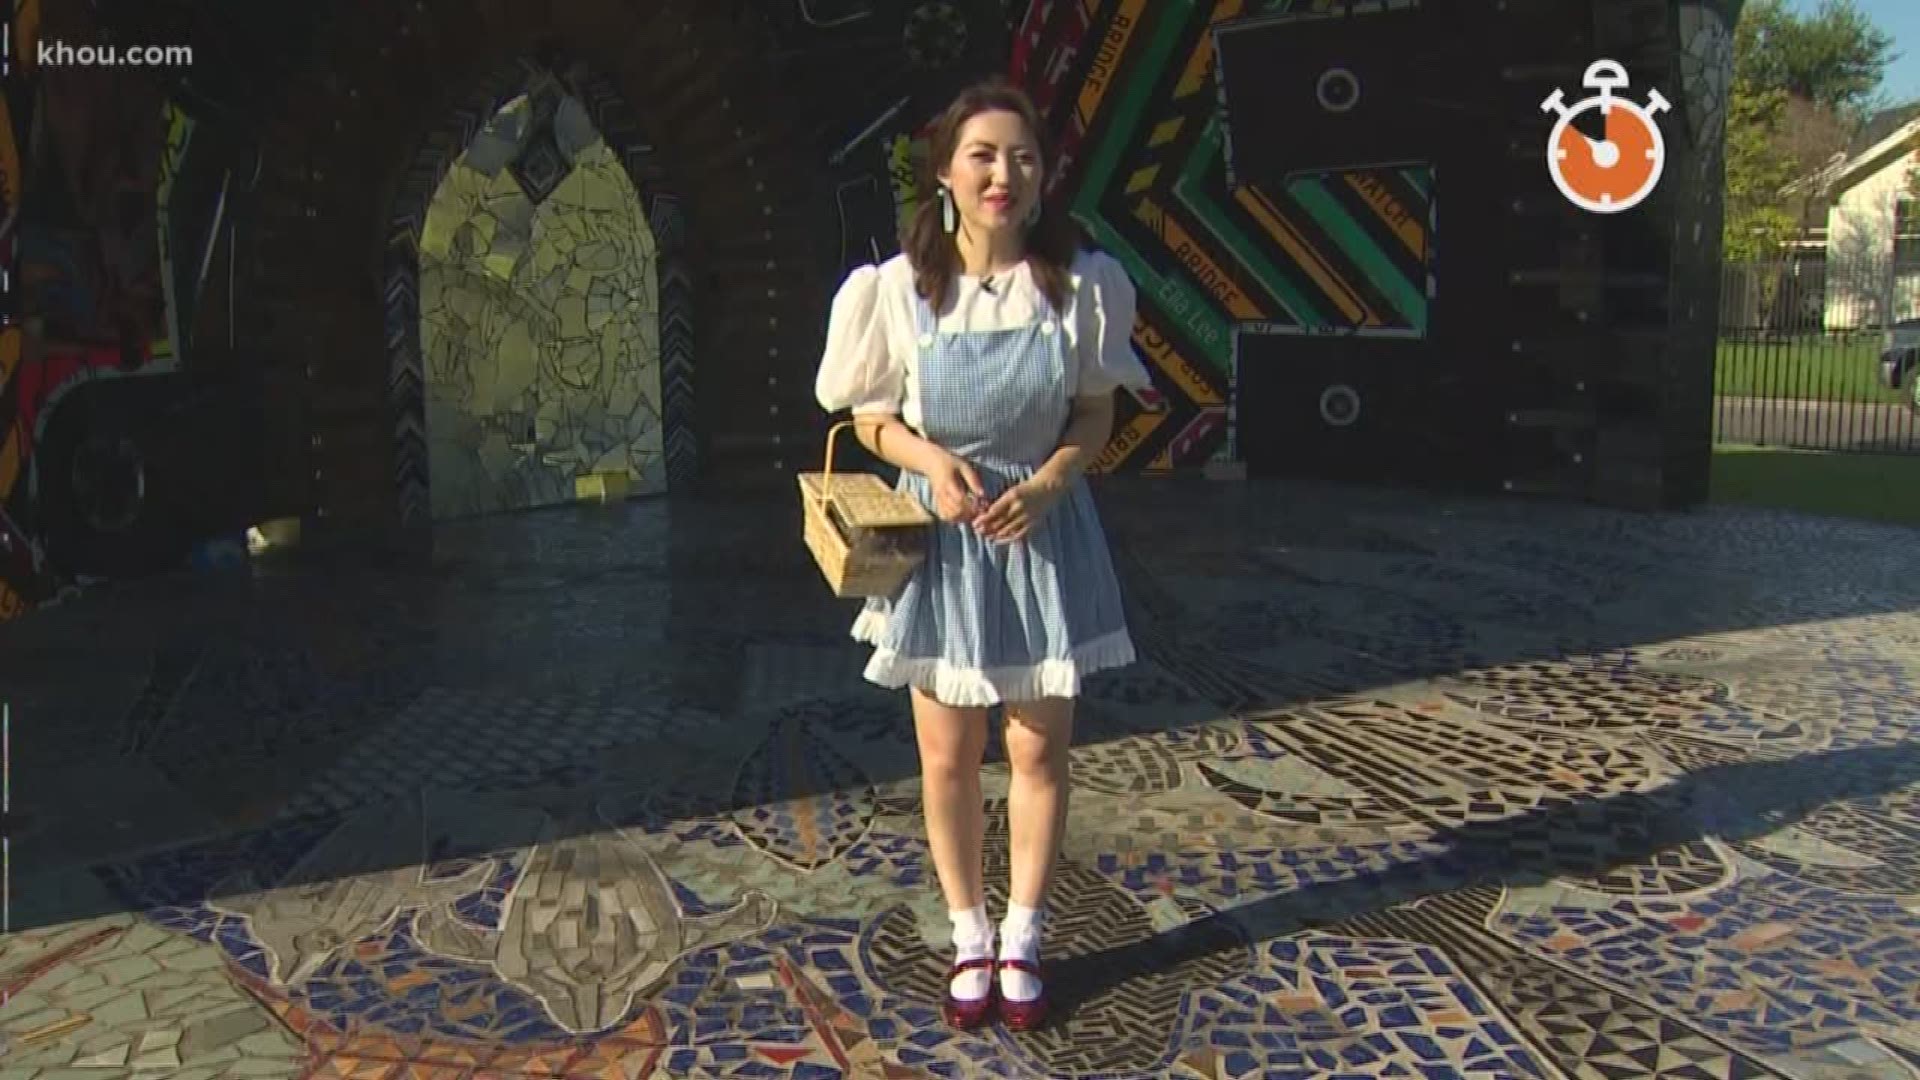 There's so many hidden gems around H-Town. For our newest HTOWN60 we checked out Smither Park in east Houston. This mosaic filled park was so whimsical, Michelle Choi got inspired to even dress up as Dorothy, to follow the mosaic filled road!